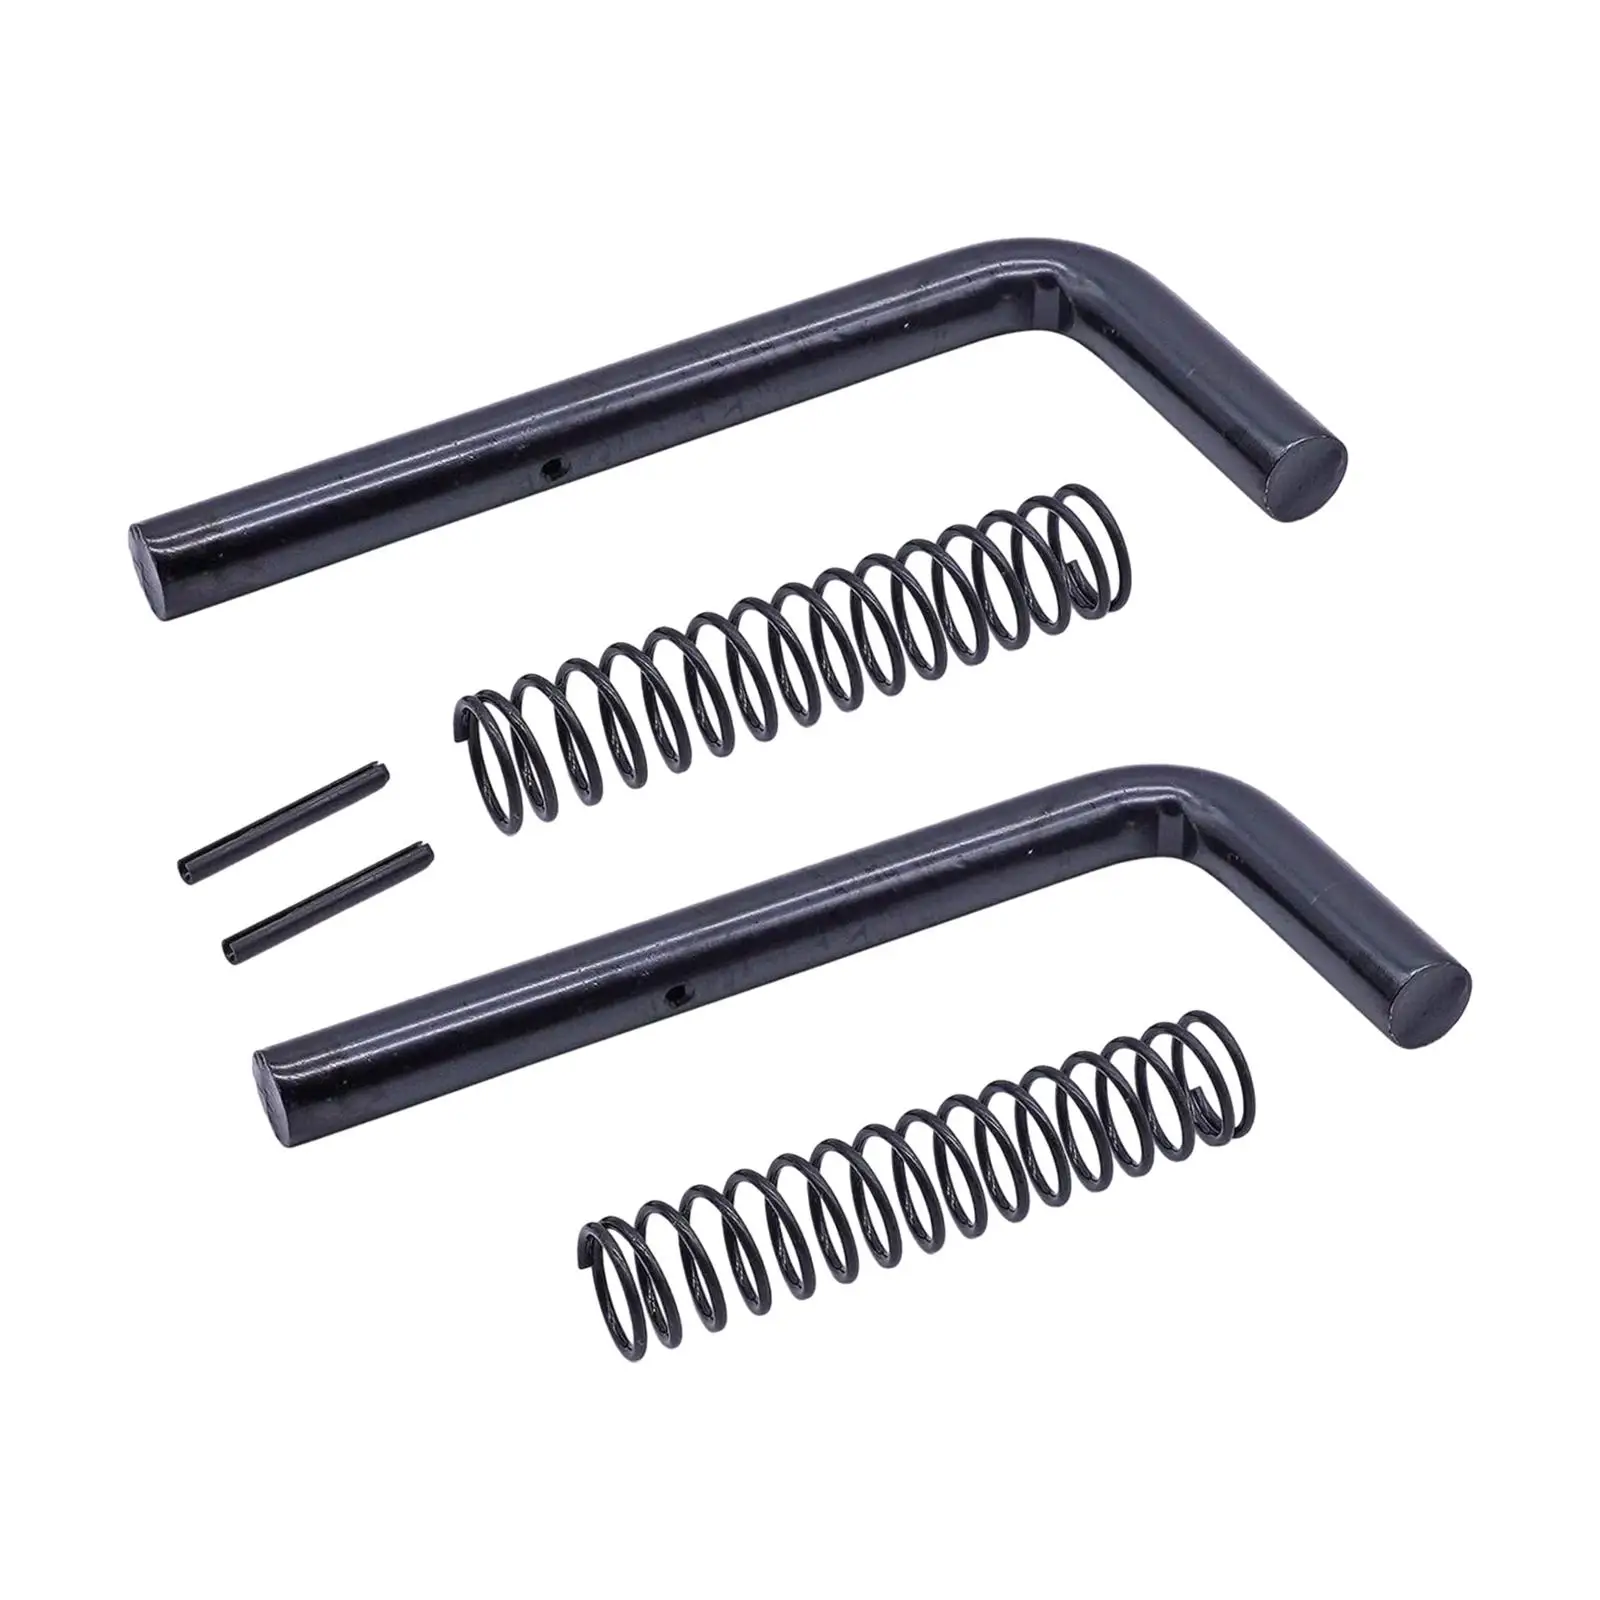 2 Pieces Trailer Gate Spring Latch Repair Kit Metal for Carry on Stable Performance Repair Long Service Life